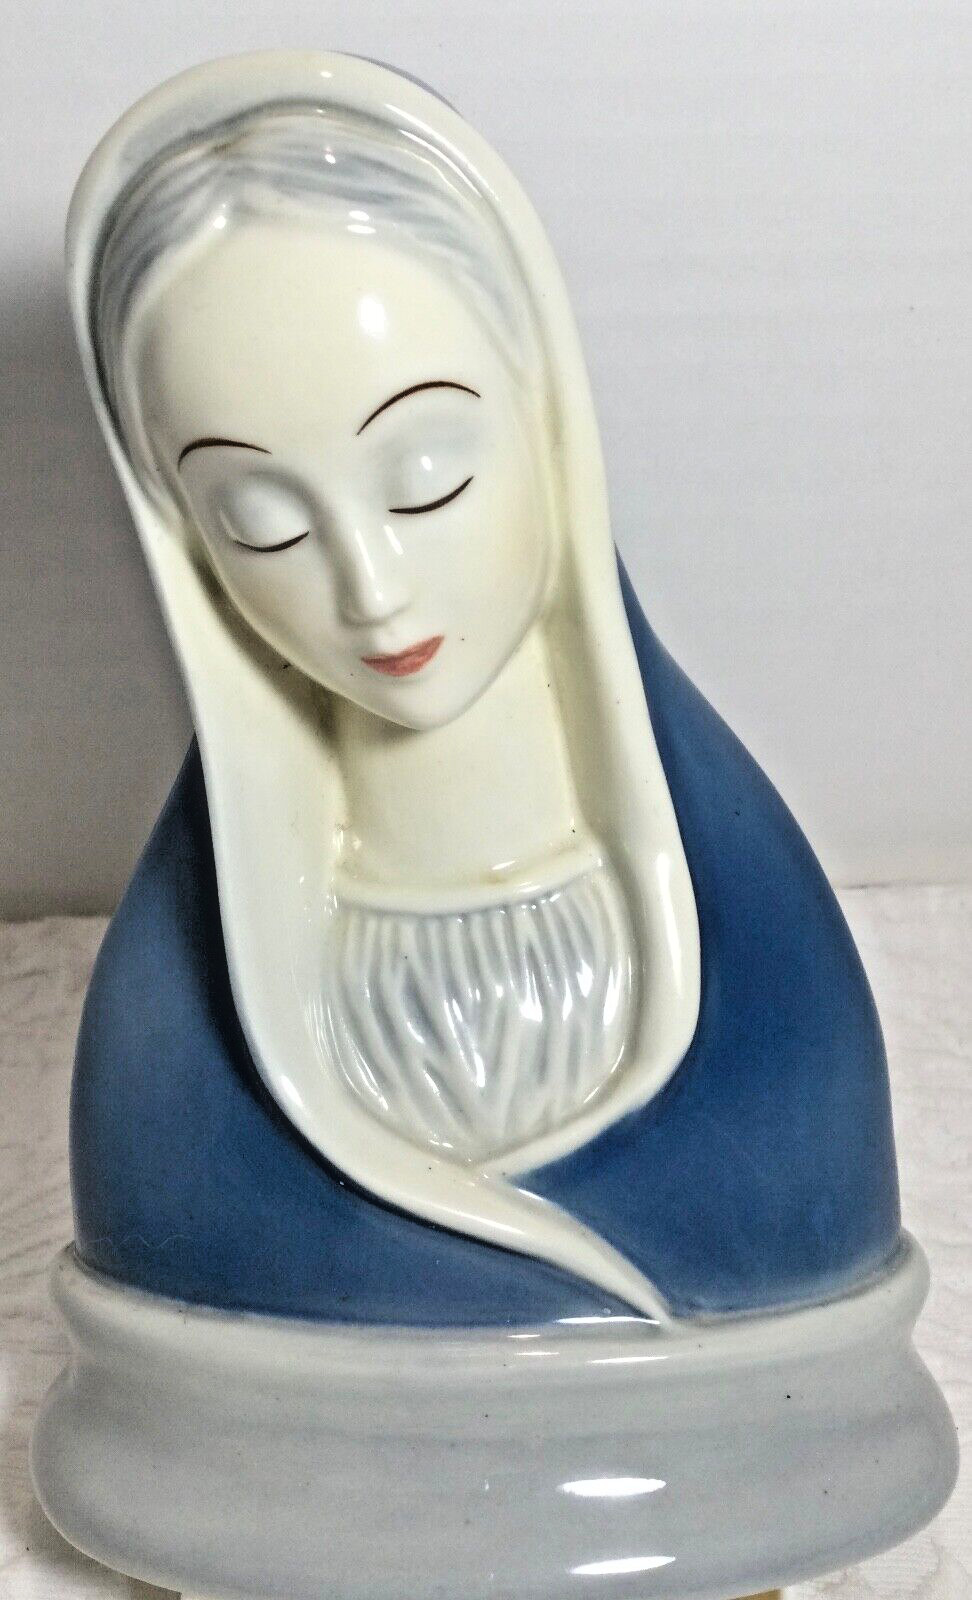 Gort Italian Bone China Madonna Bust / Figurine 6” Tall Made in Italy GORGEOUS